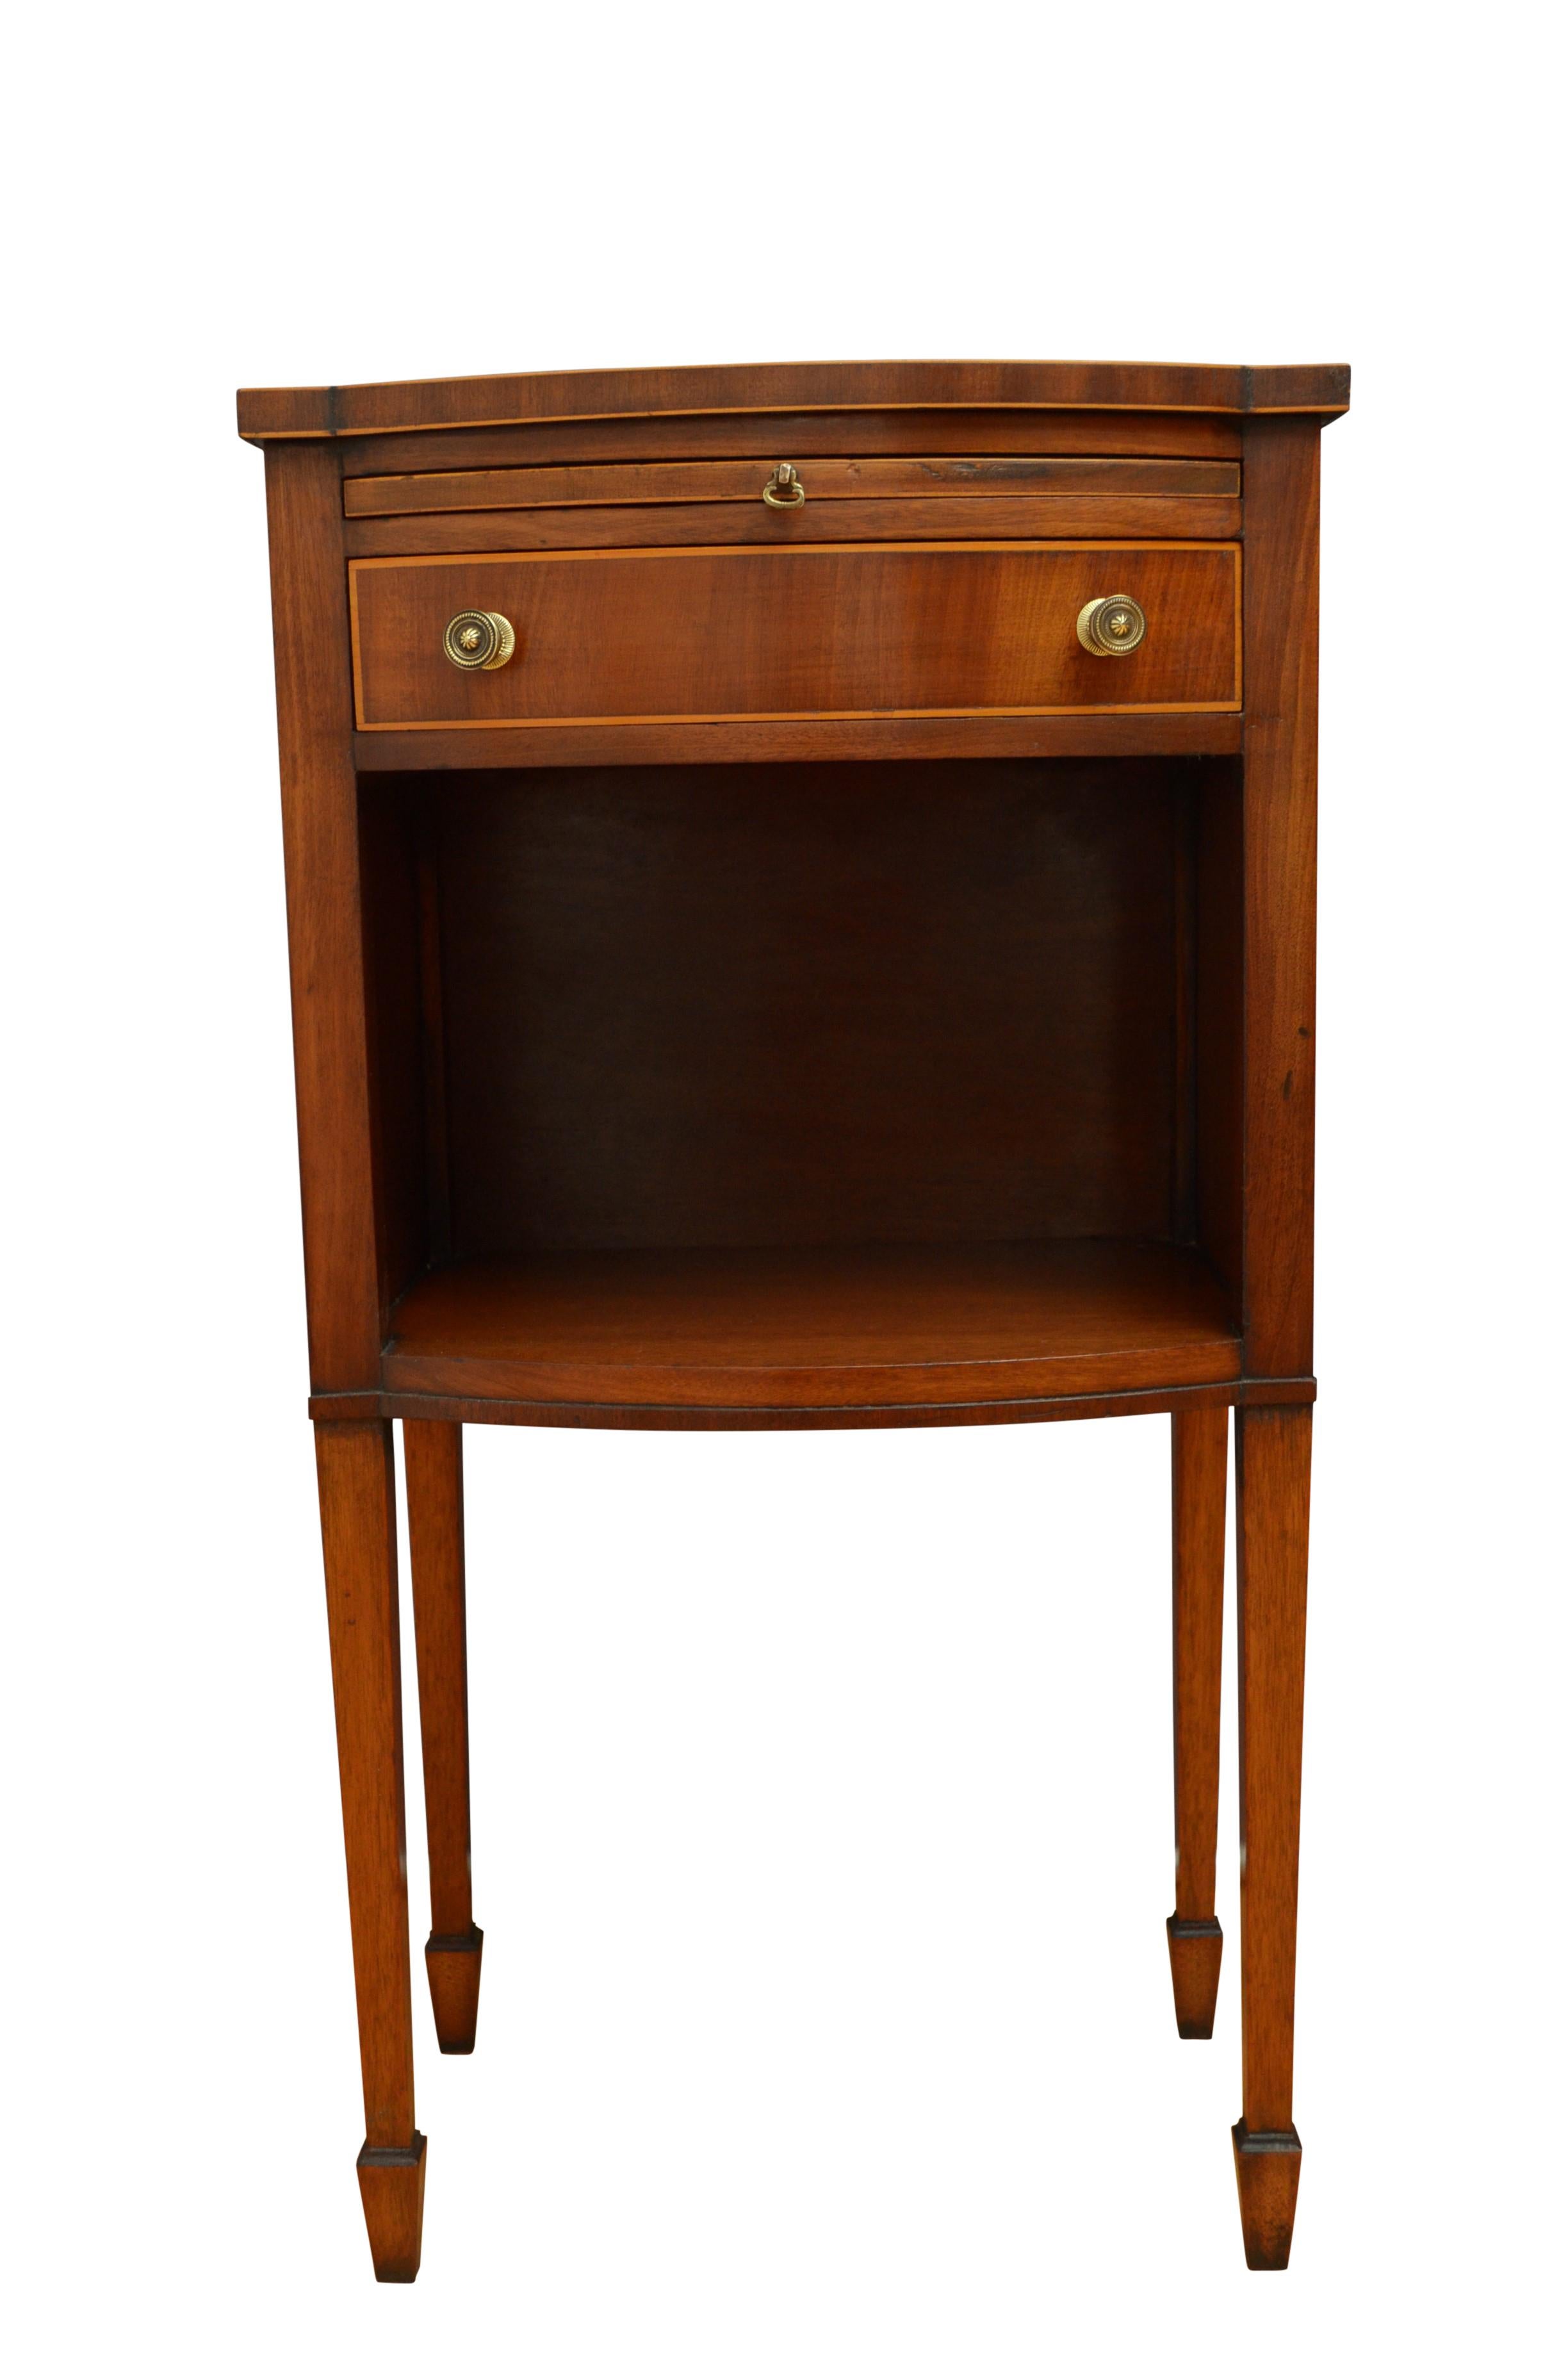 20th Century Edwardian Pair of Bedside Cabinets